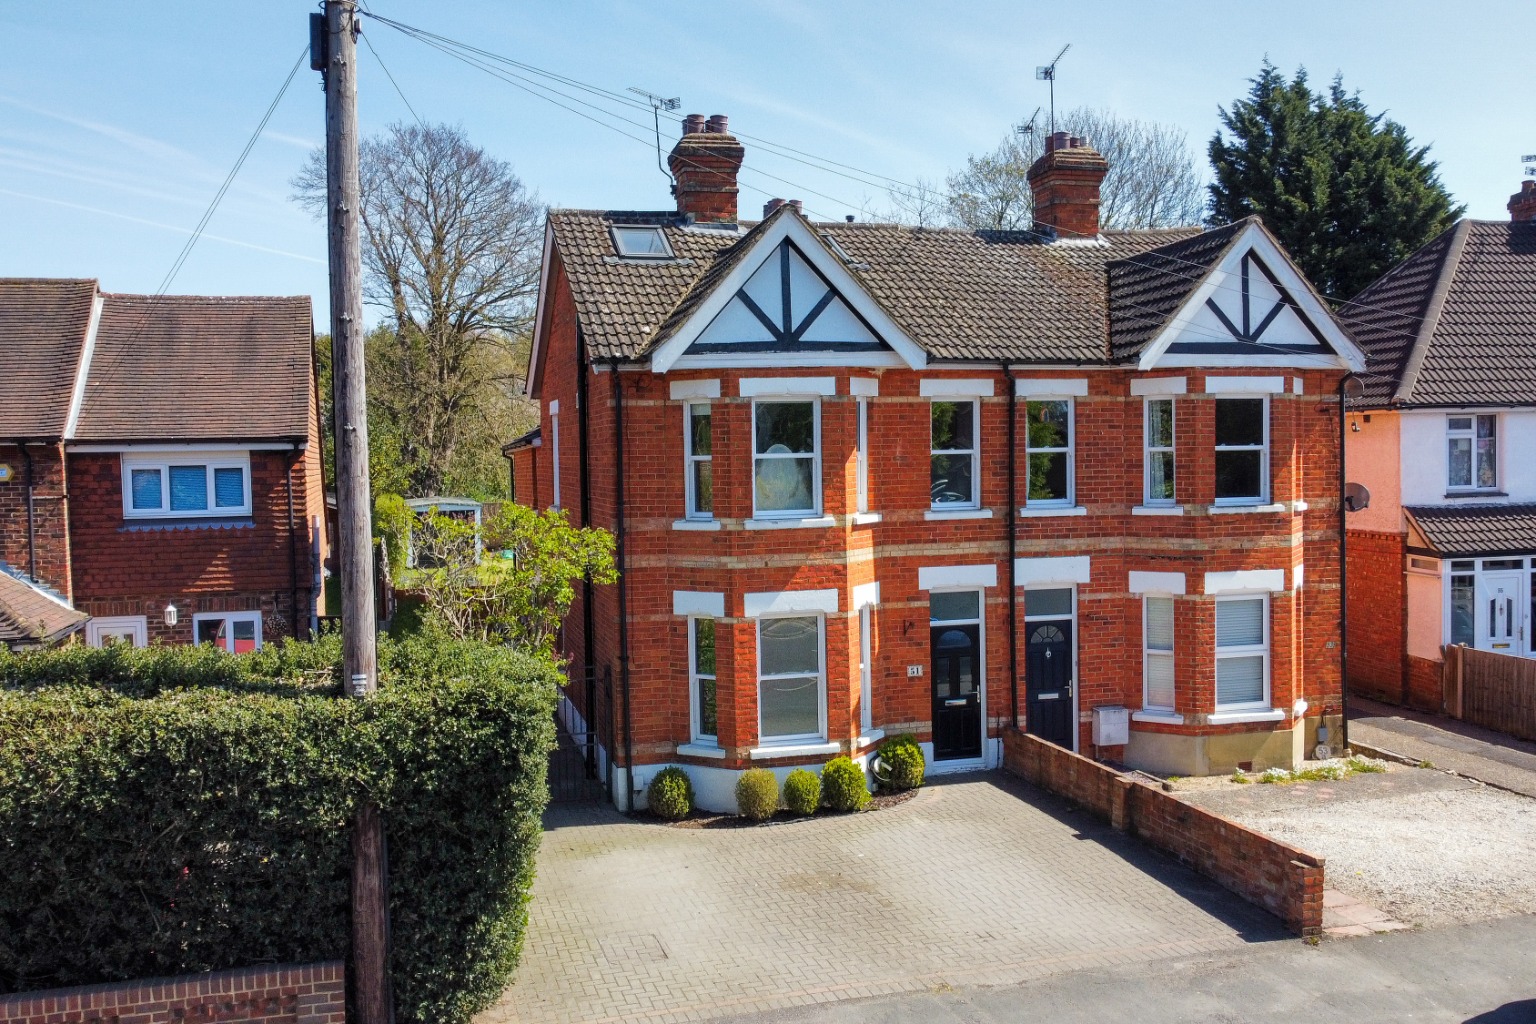 *MARKETED BY CHRIS GRAY*  This stunning semi-detached Victorian home is located only a few minutes away from Camberley town centre and train station., with five double bedrooms, three reception areas and a bath/shower room on every floor!